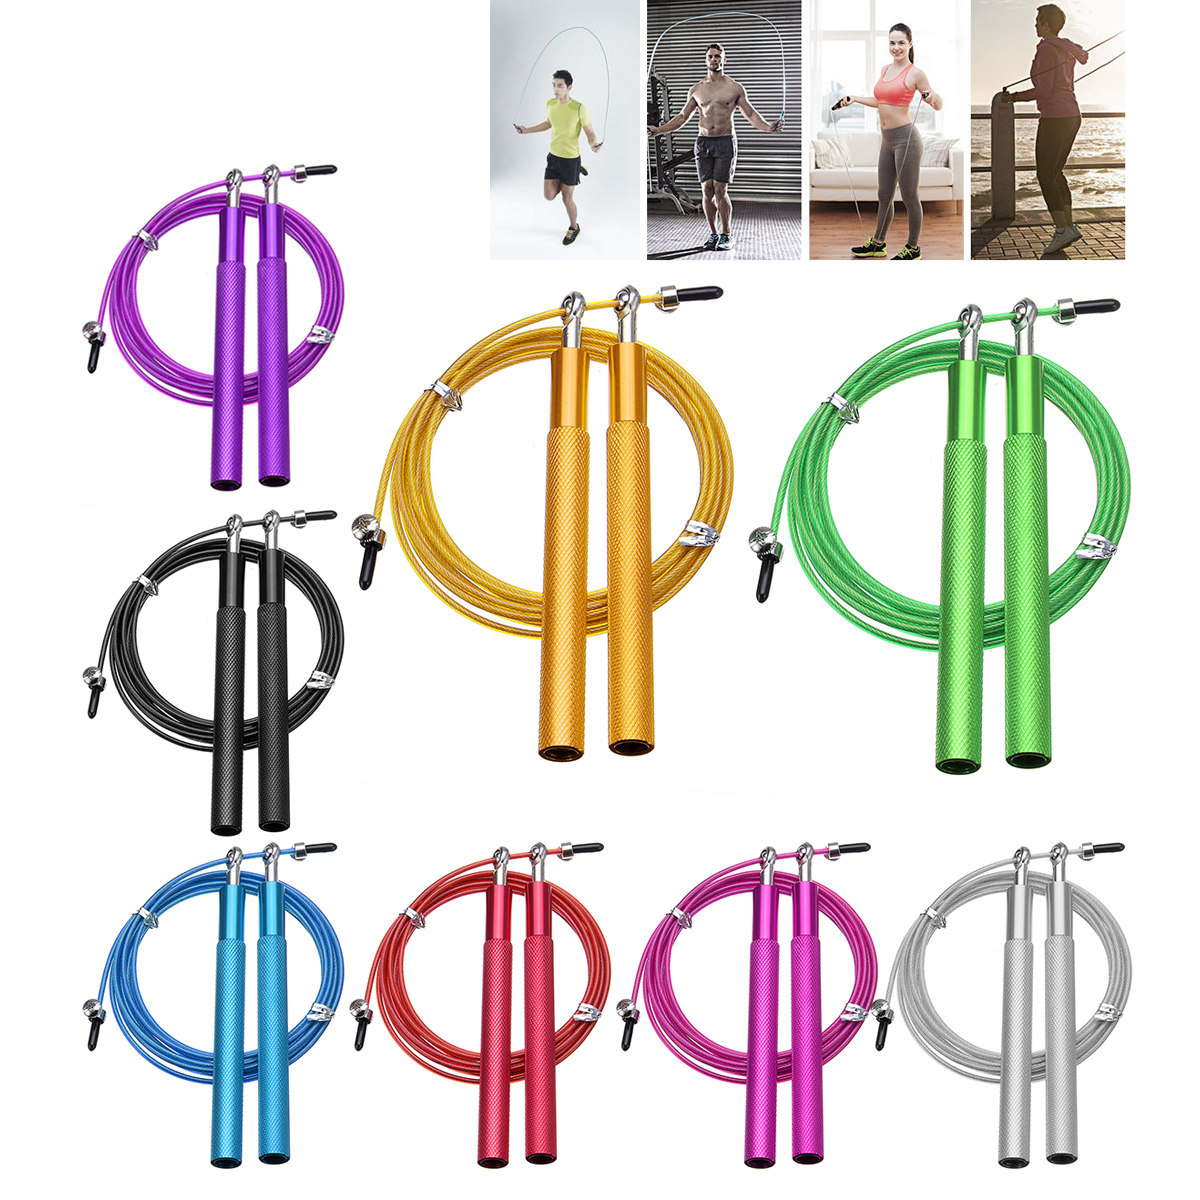 Aluminum-Speed-Rope-Jumping-Sports-Fitness-Exercise-Skipping-Rope-Cardio-Cable-1592088-1